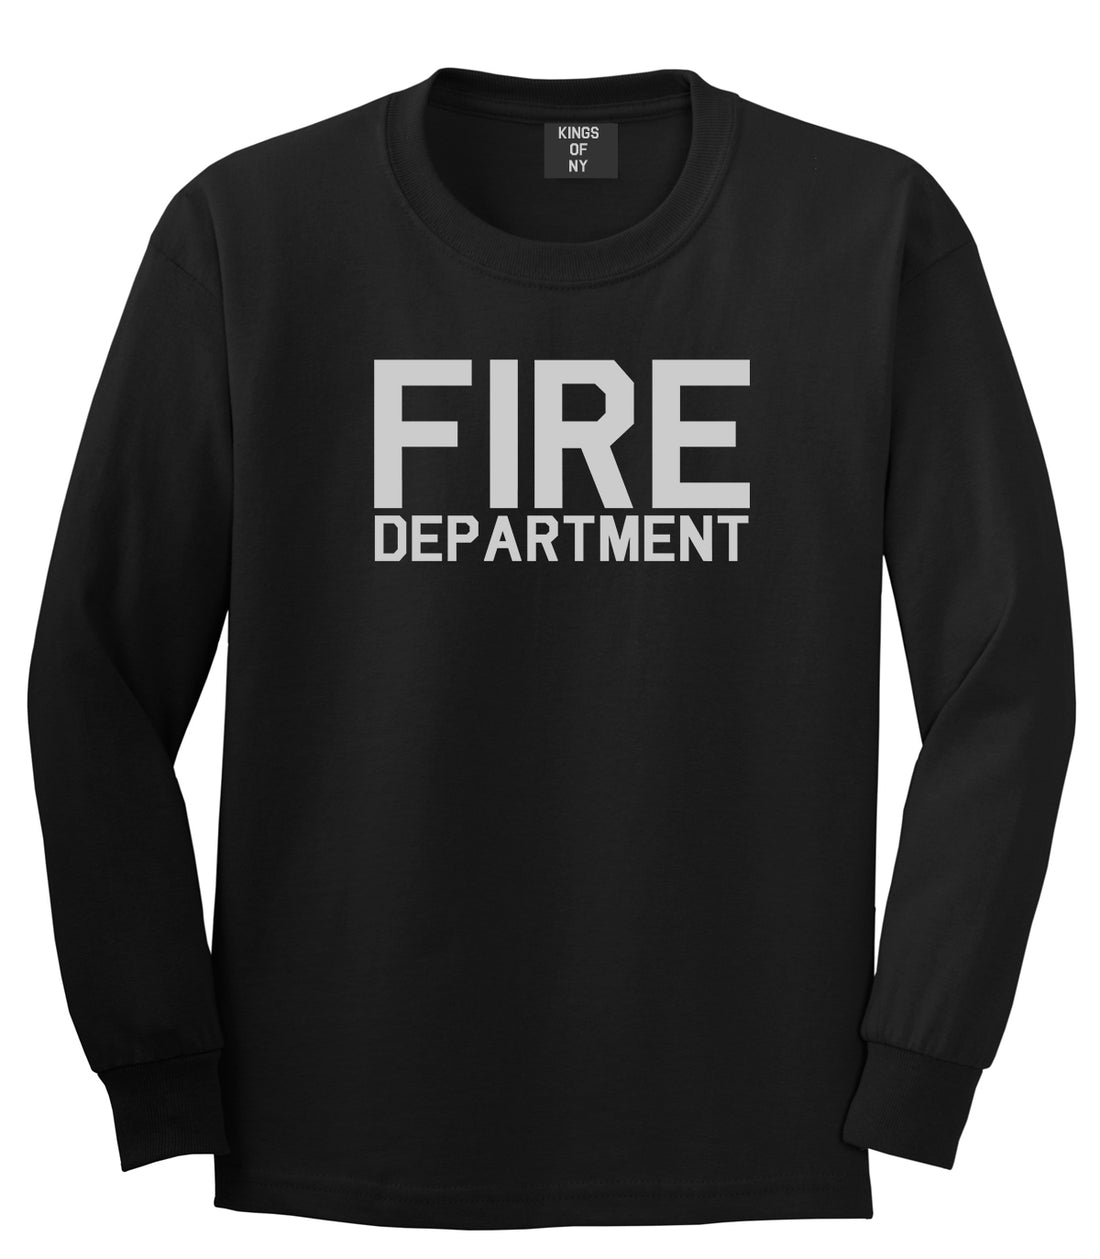 Fire Department Dept Mens Black Long Sleeve T-Shirt by KINGS OF NY